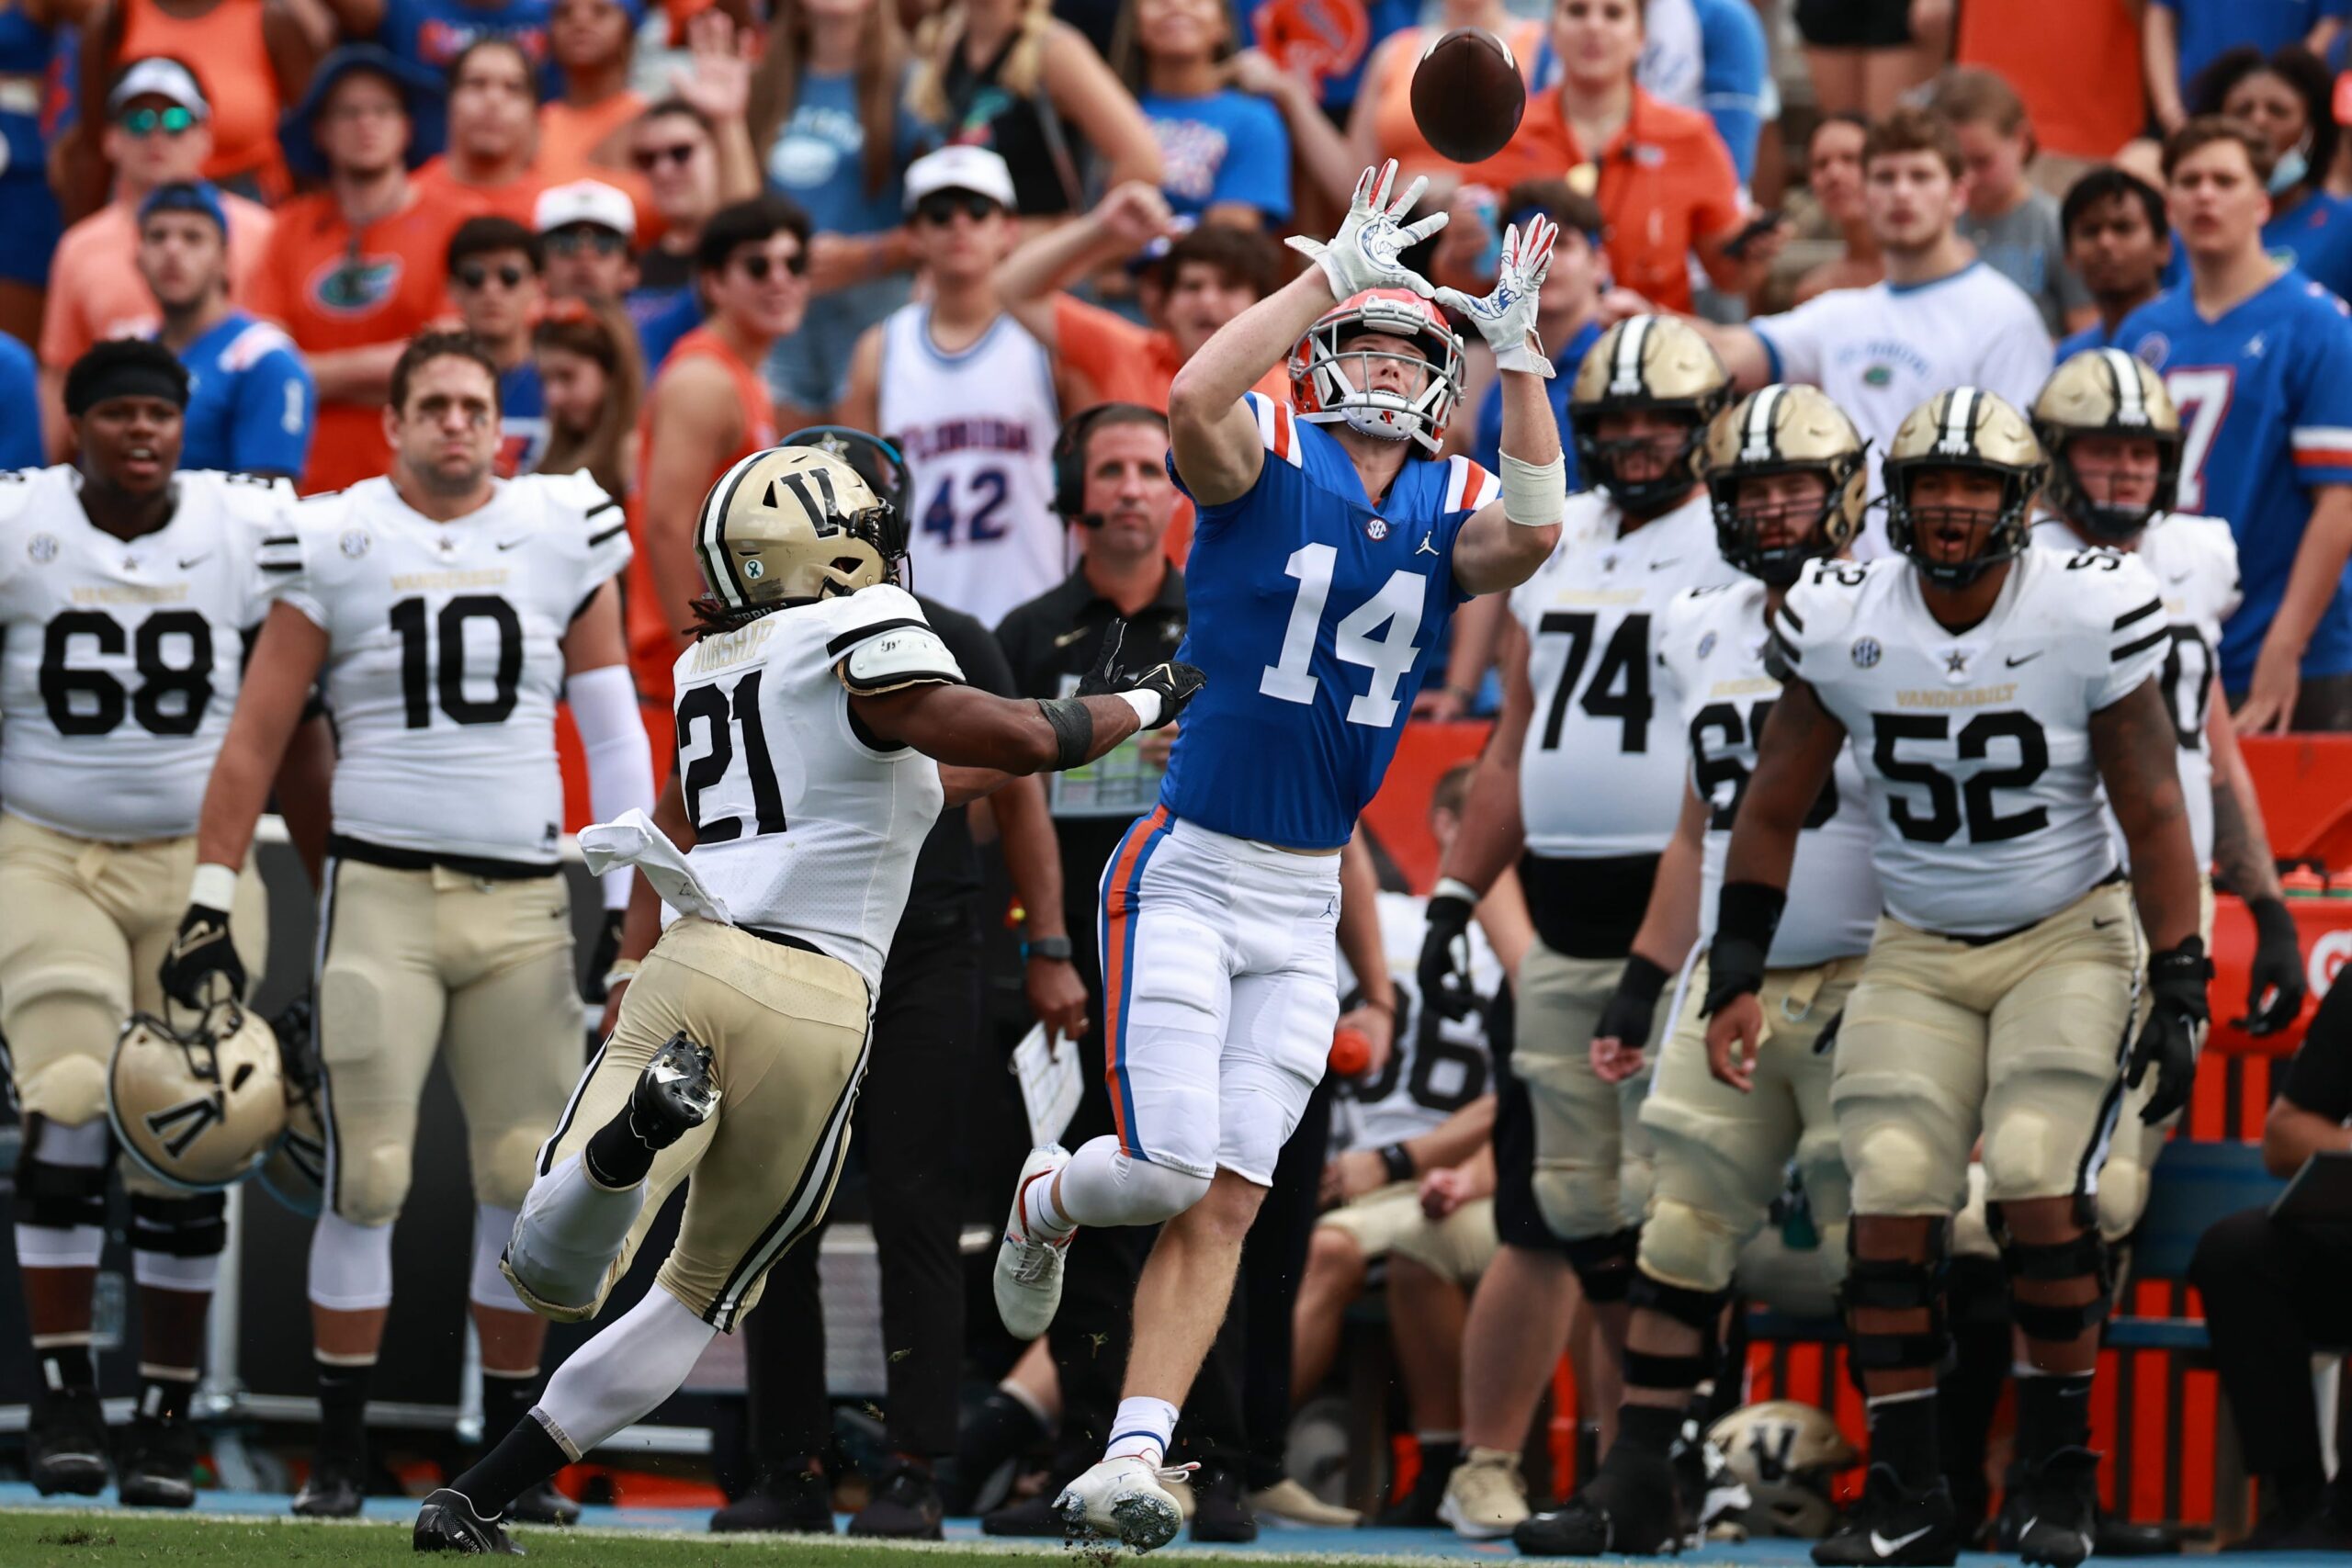 Former Florida wide receiver stays in-state, transfers to UCF